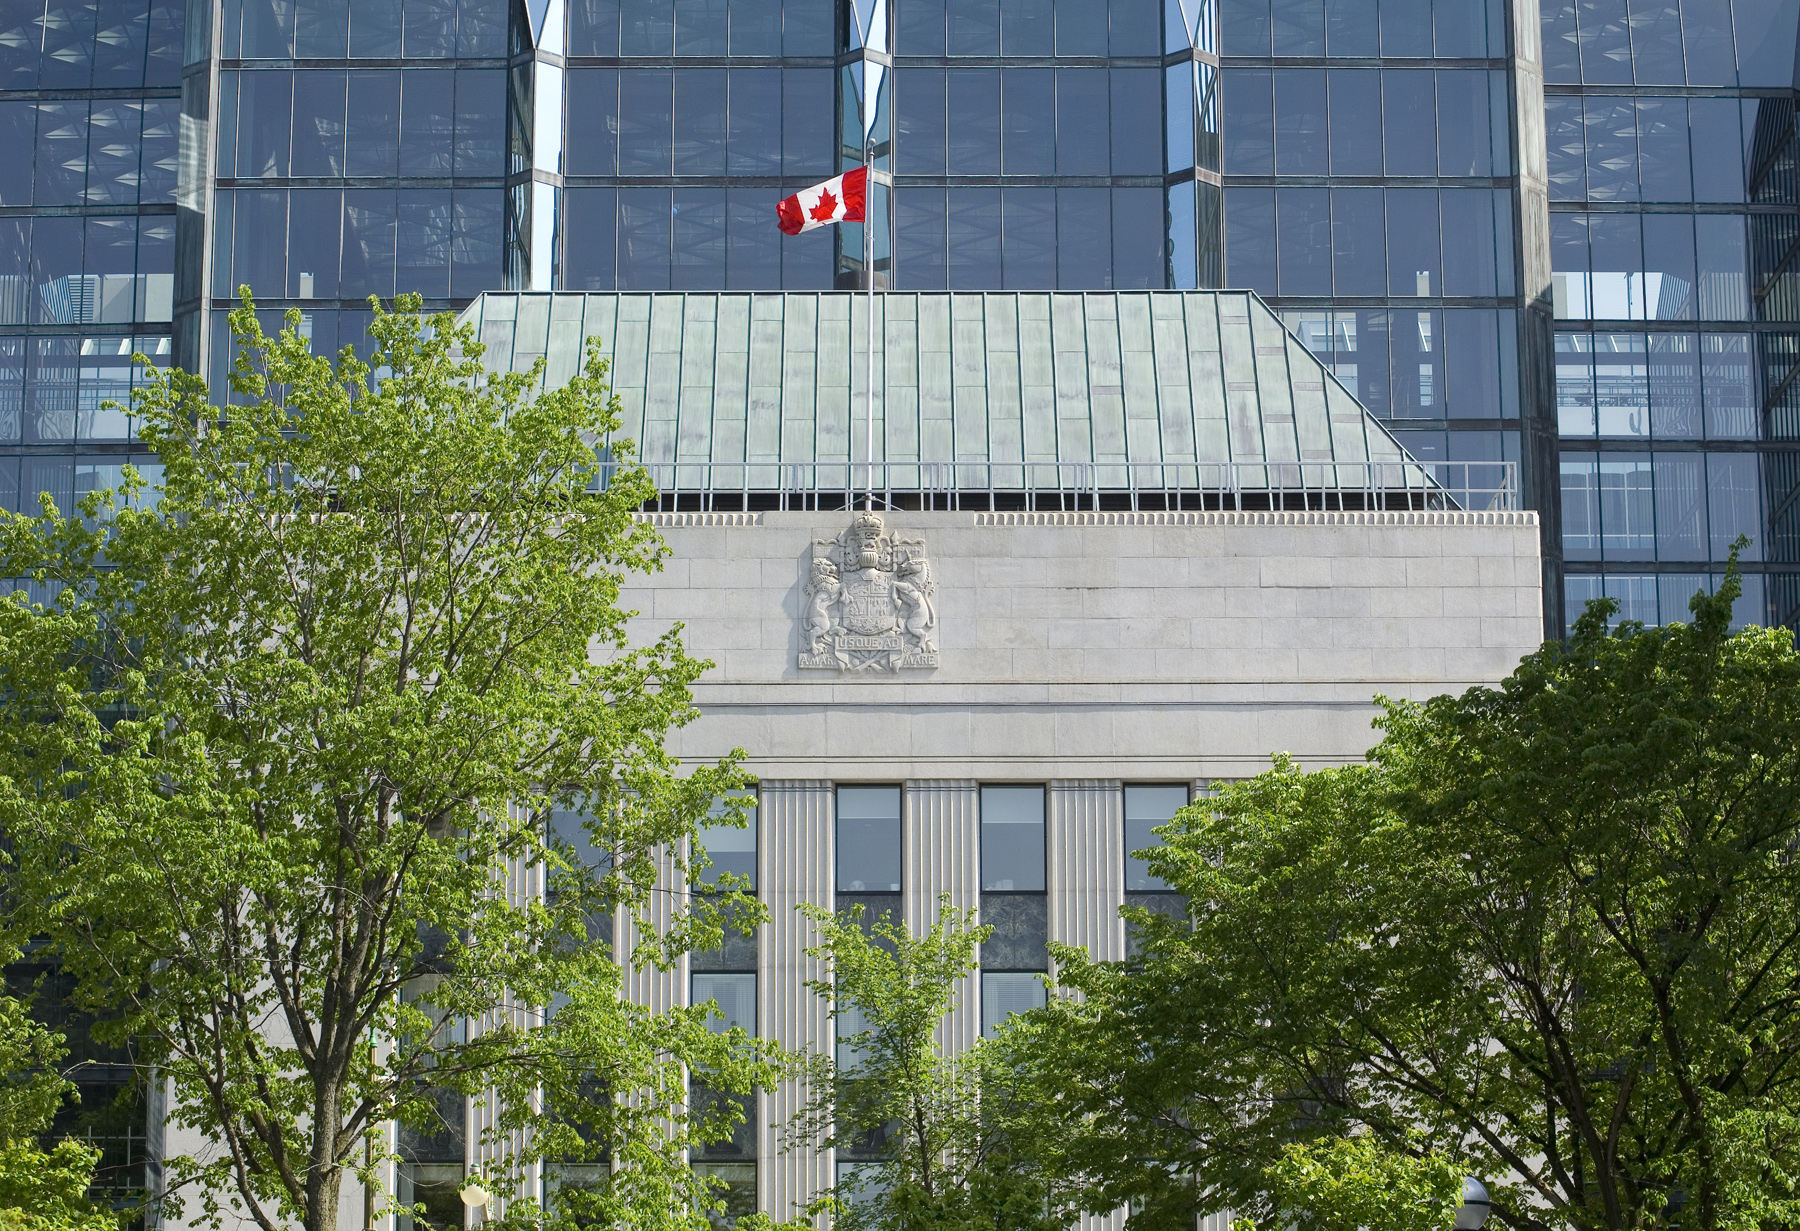 Bank of Canada raises policy rate by 25bps, continues quantitative tightening